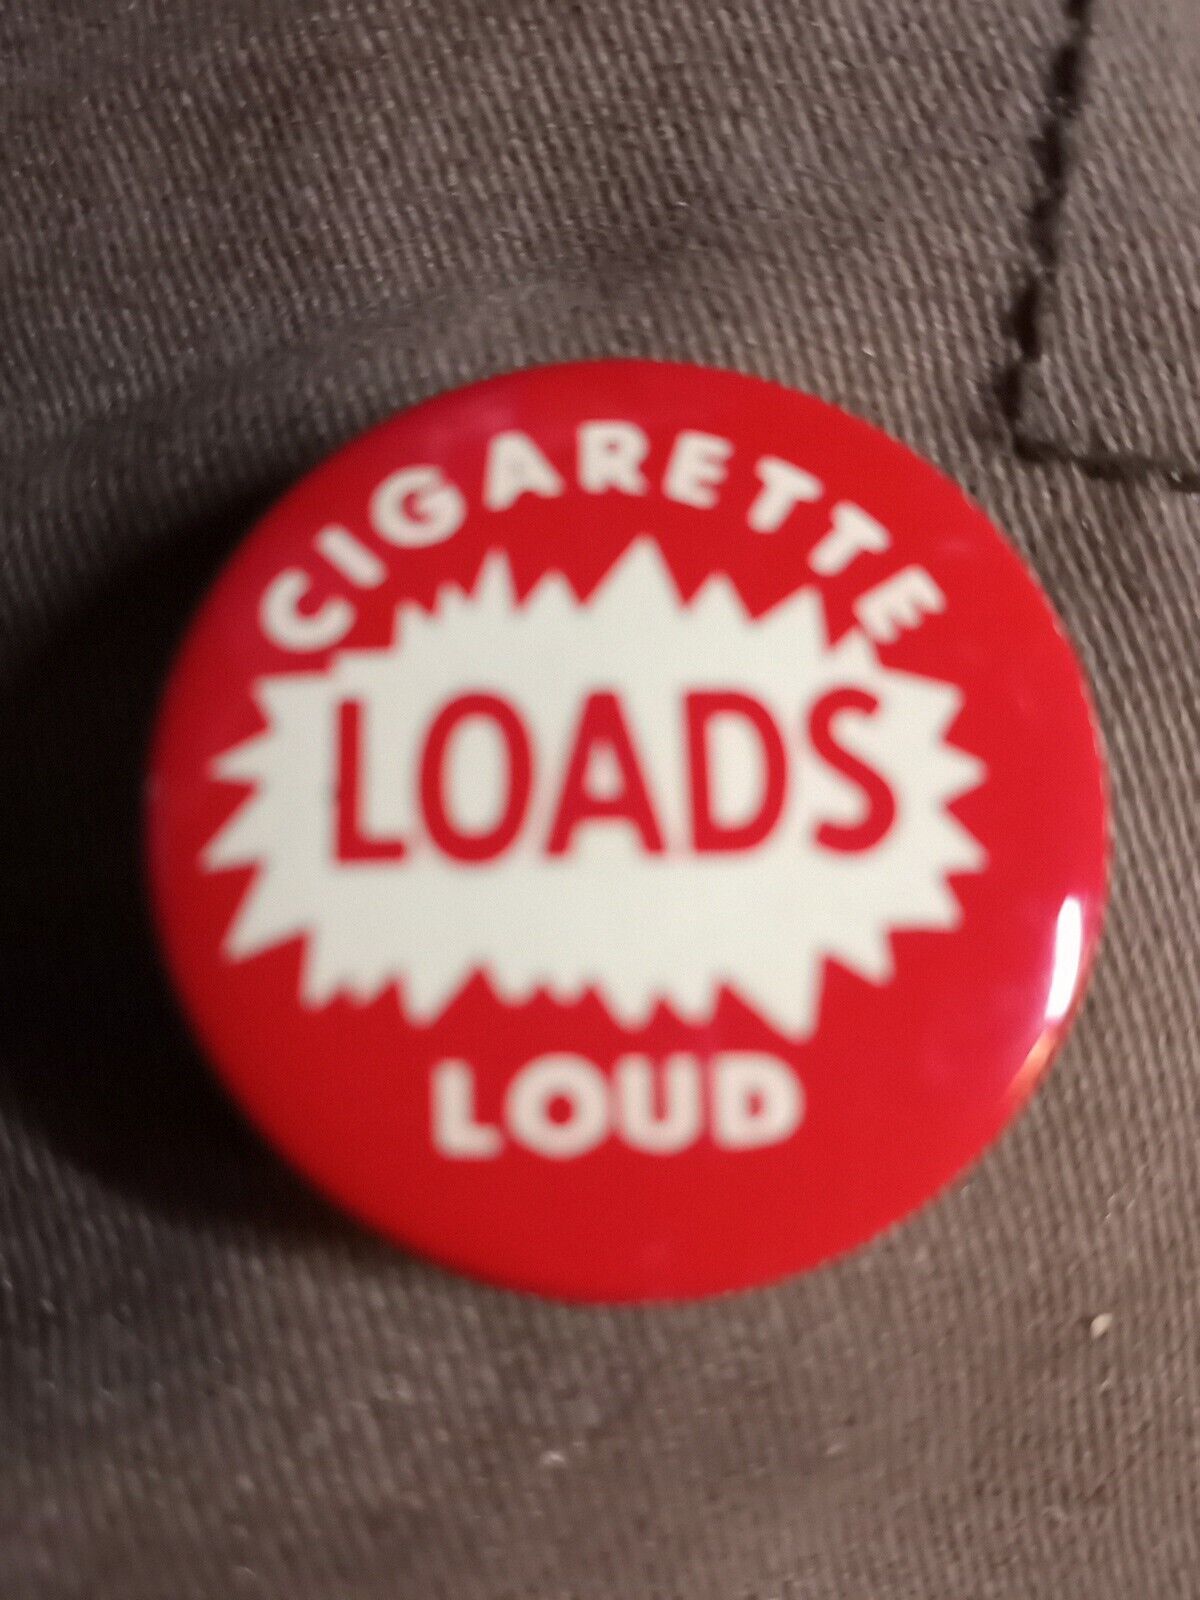 VINTAGE CIGARETTE LOADS LOUD METAL TIN CONTAINER With Loads Included GAG JOKE 